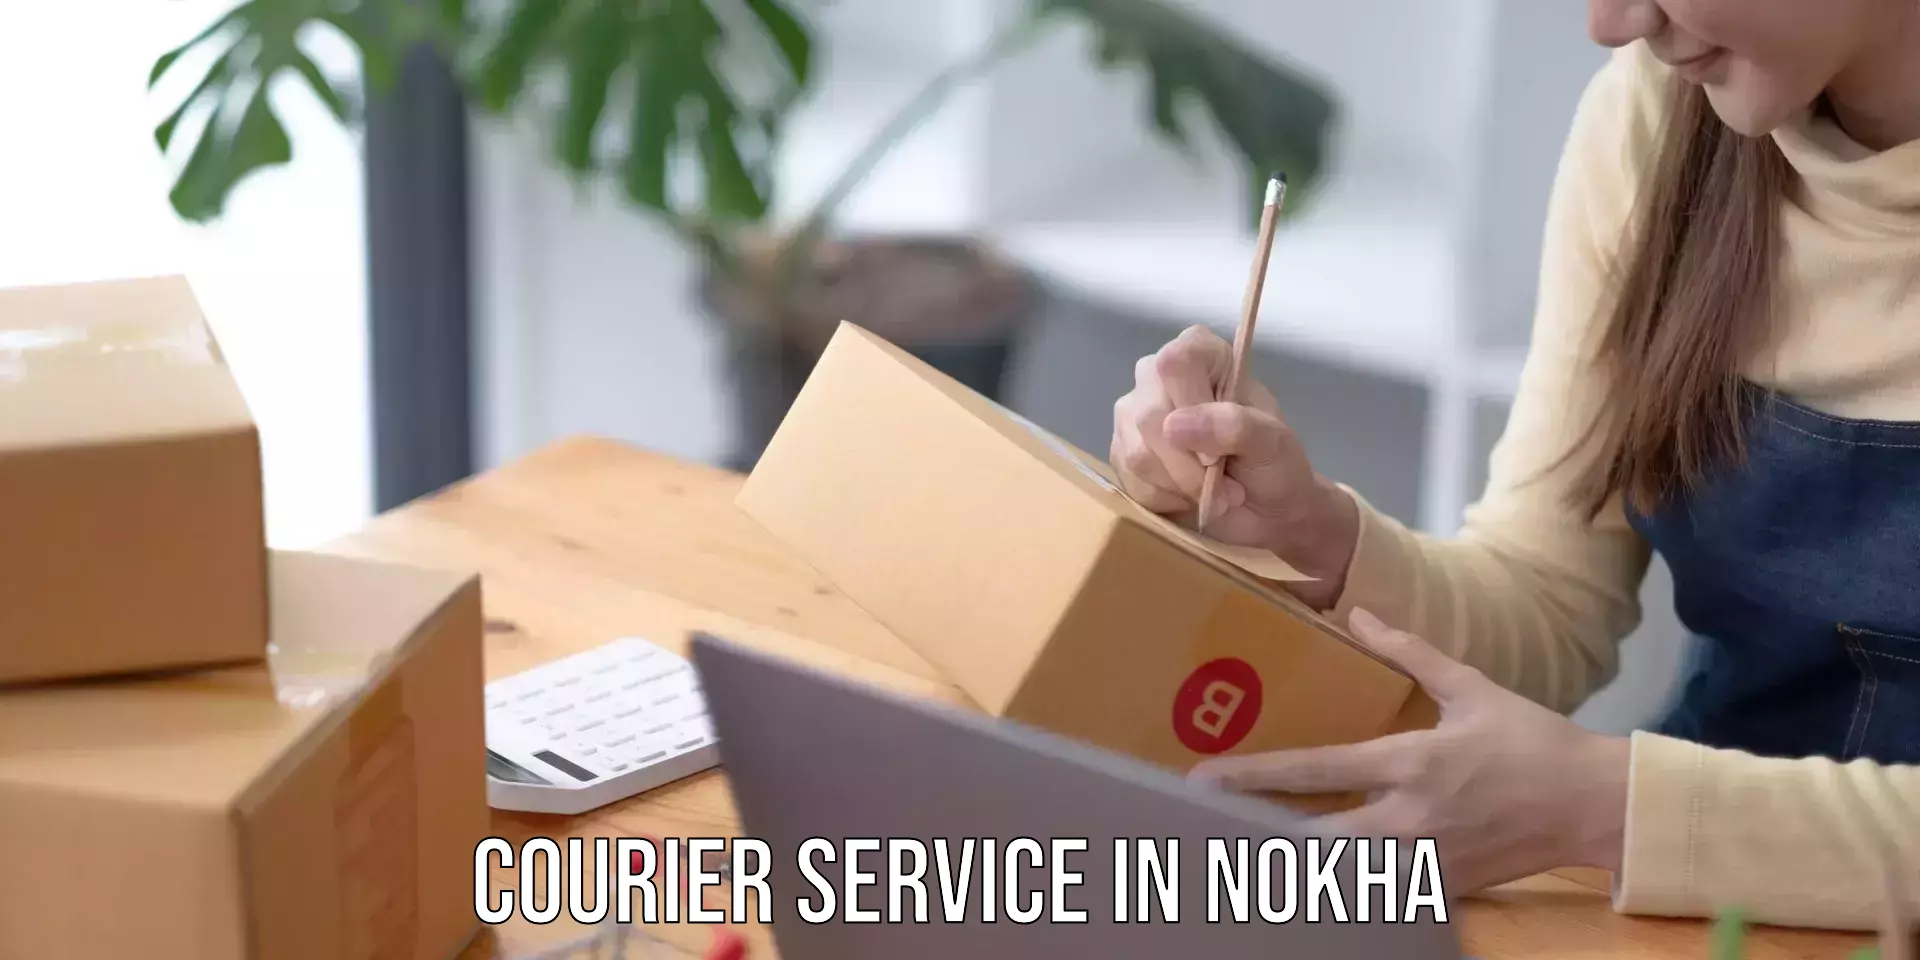 Scalable shipping solutions in Nokha